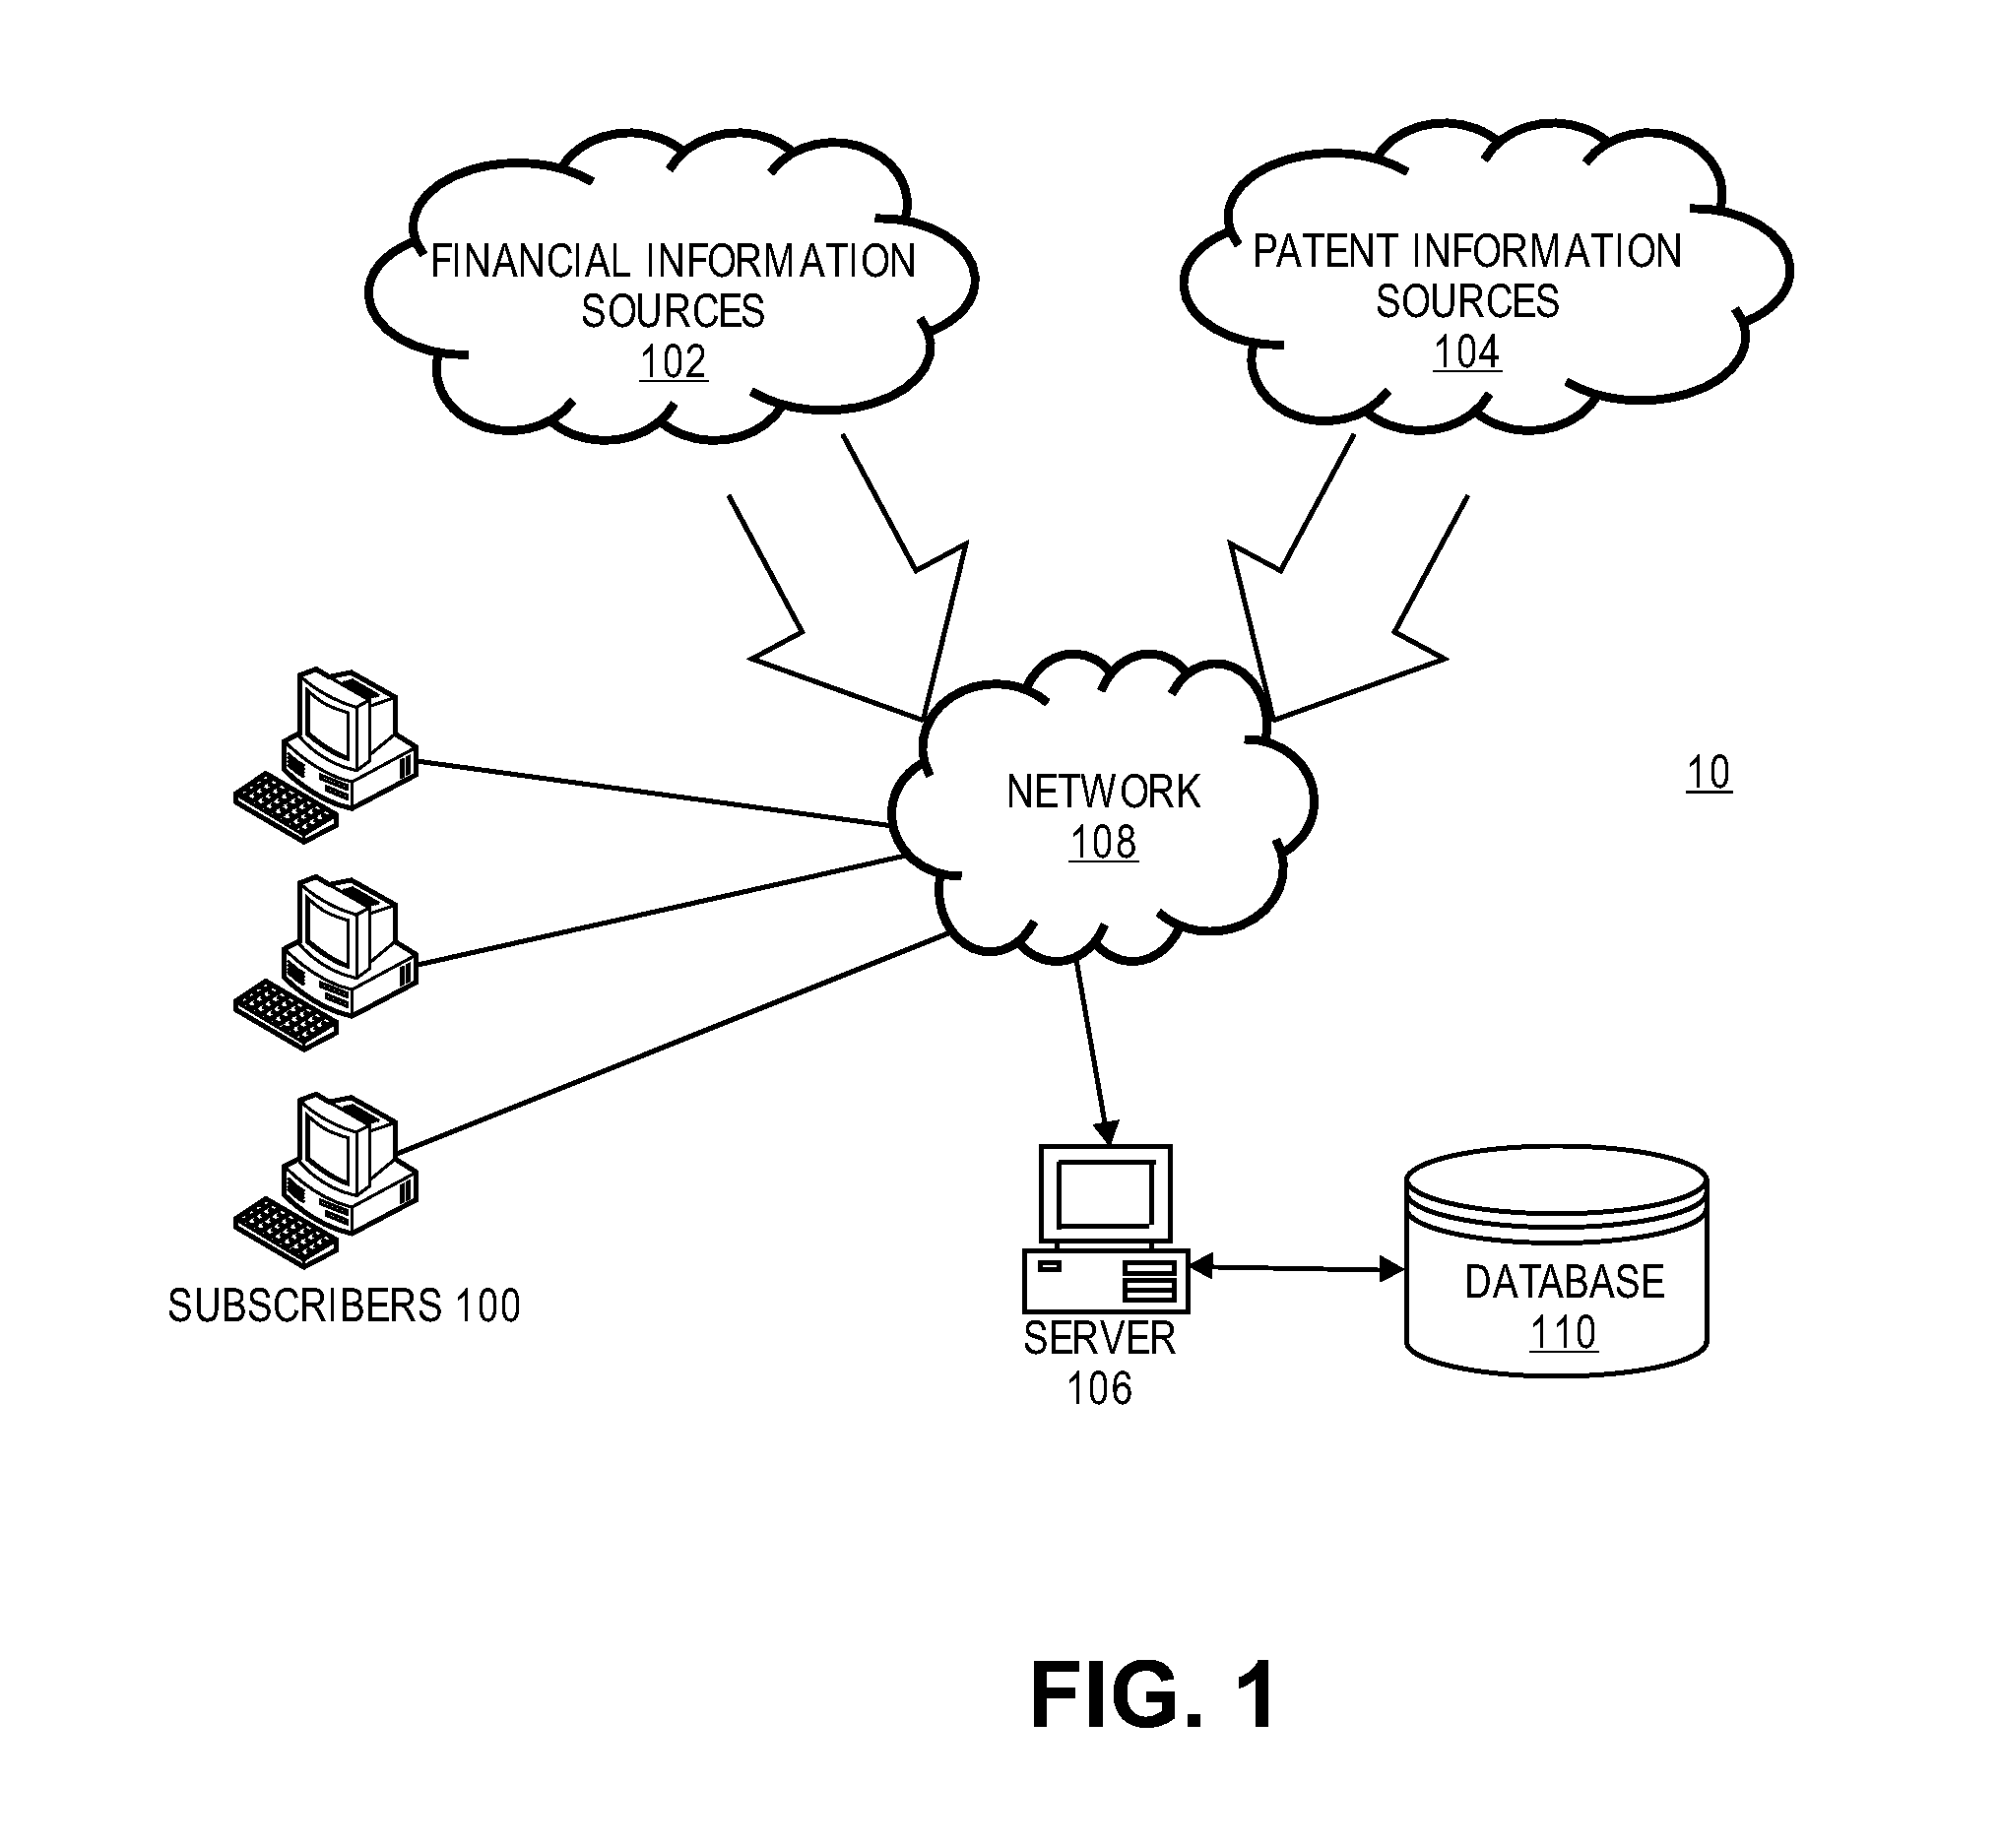 Methods and Systems for Analyzing Patent Applications to Identify Undervalued Stocks